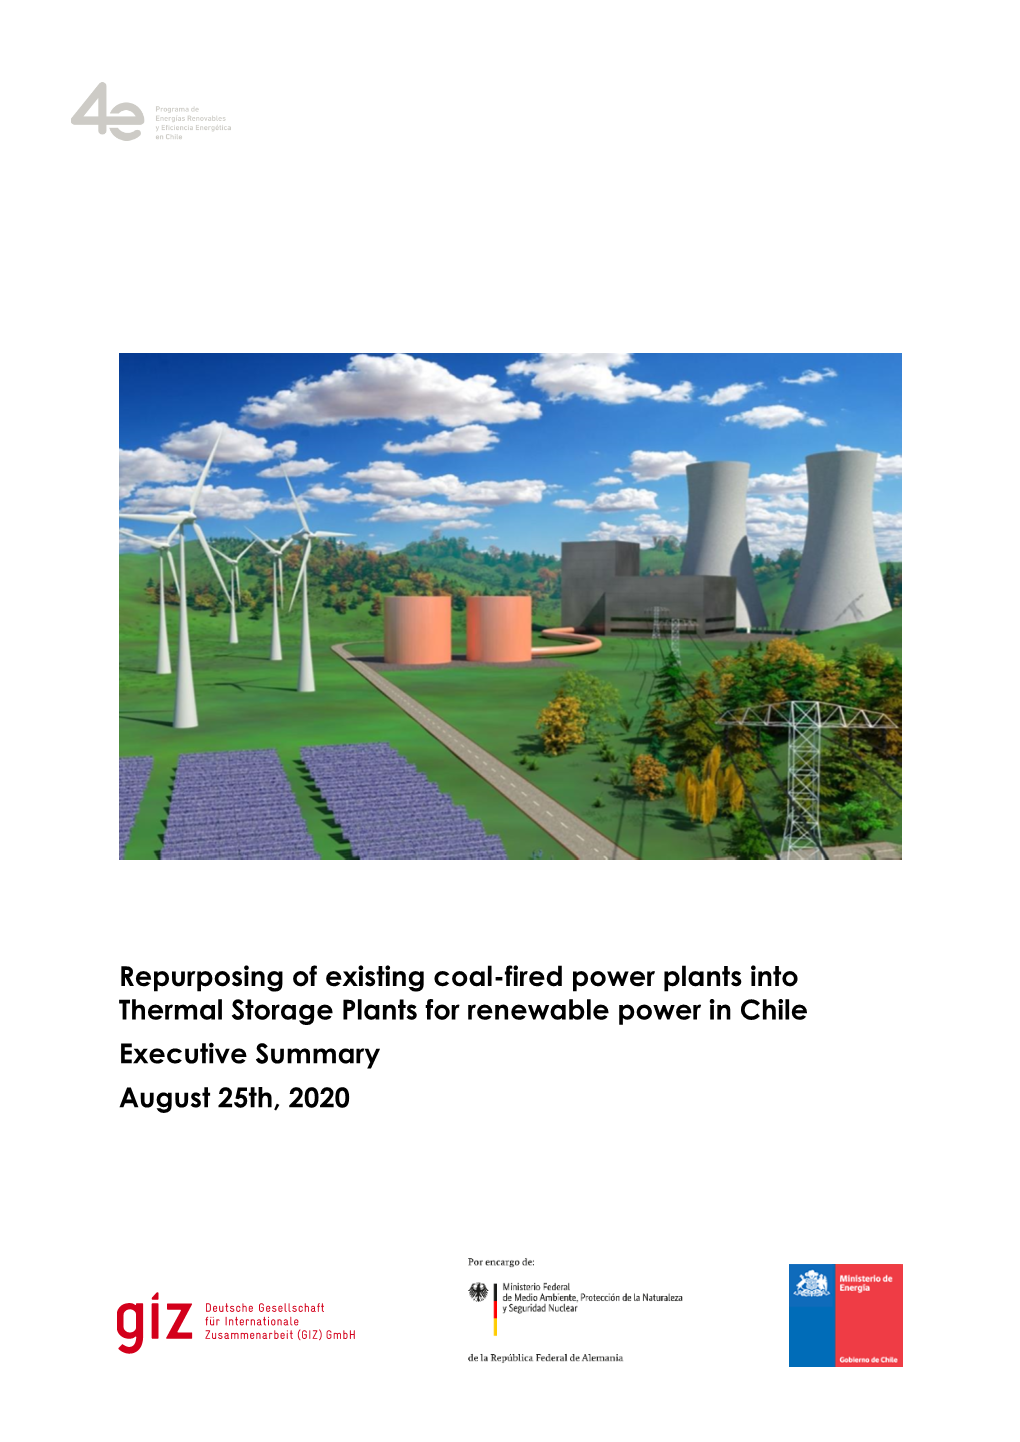 Repurposing of Existing Coal-Fired Power Plants Into Thermal Storage Plants for Renewable Power in Chile